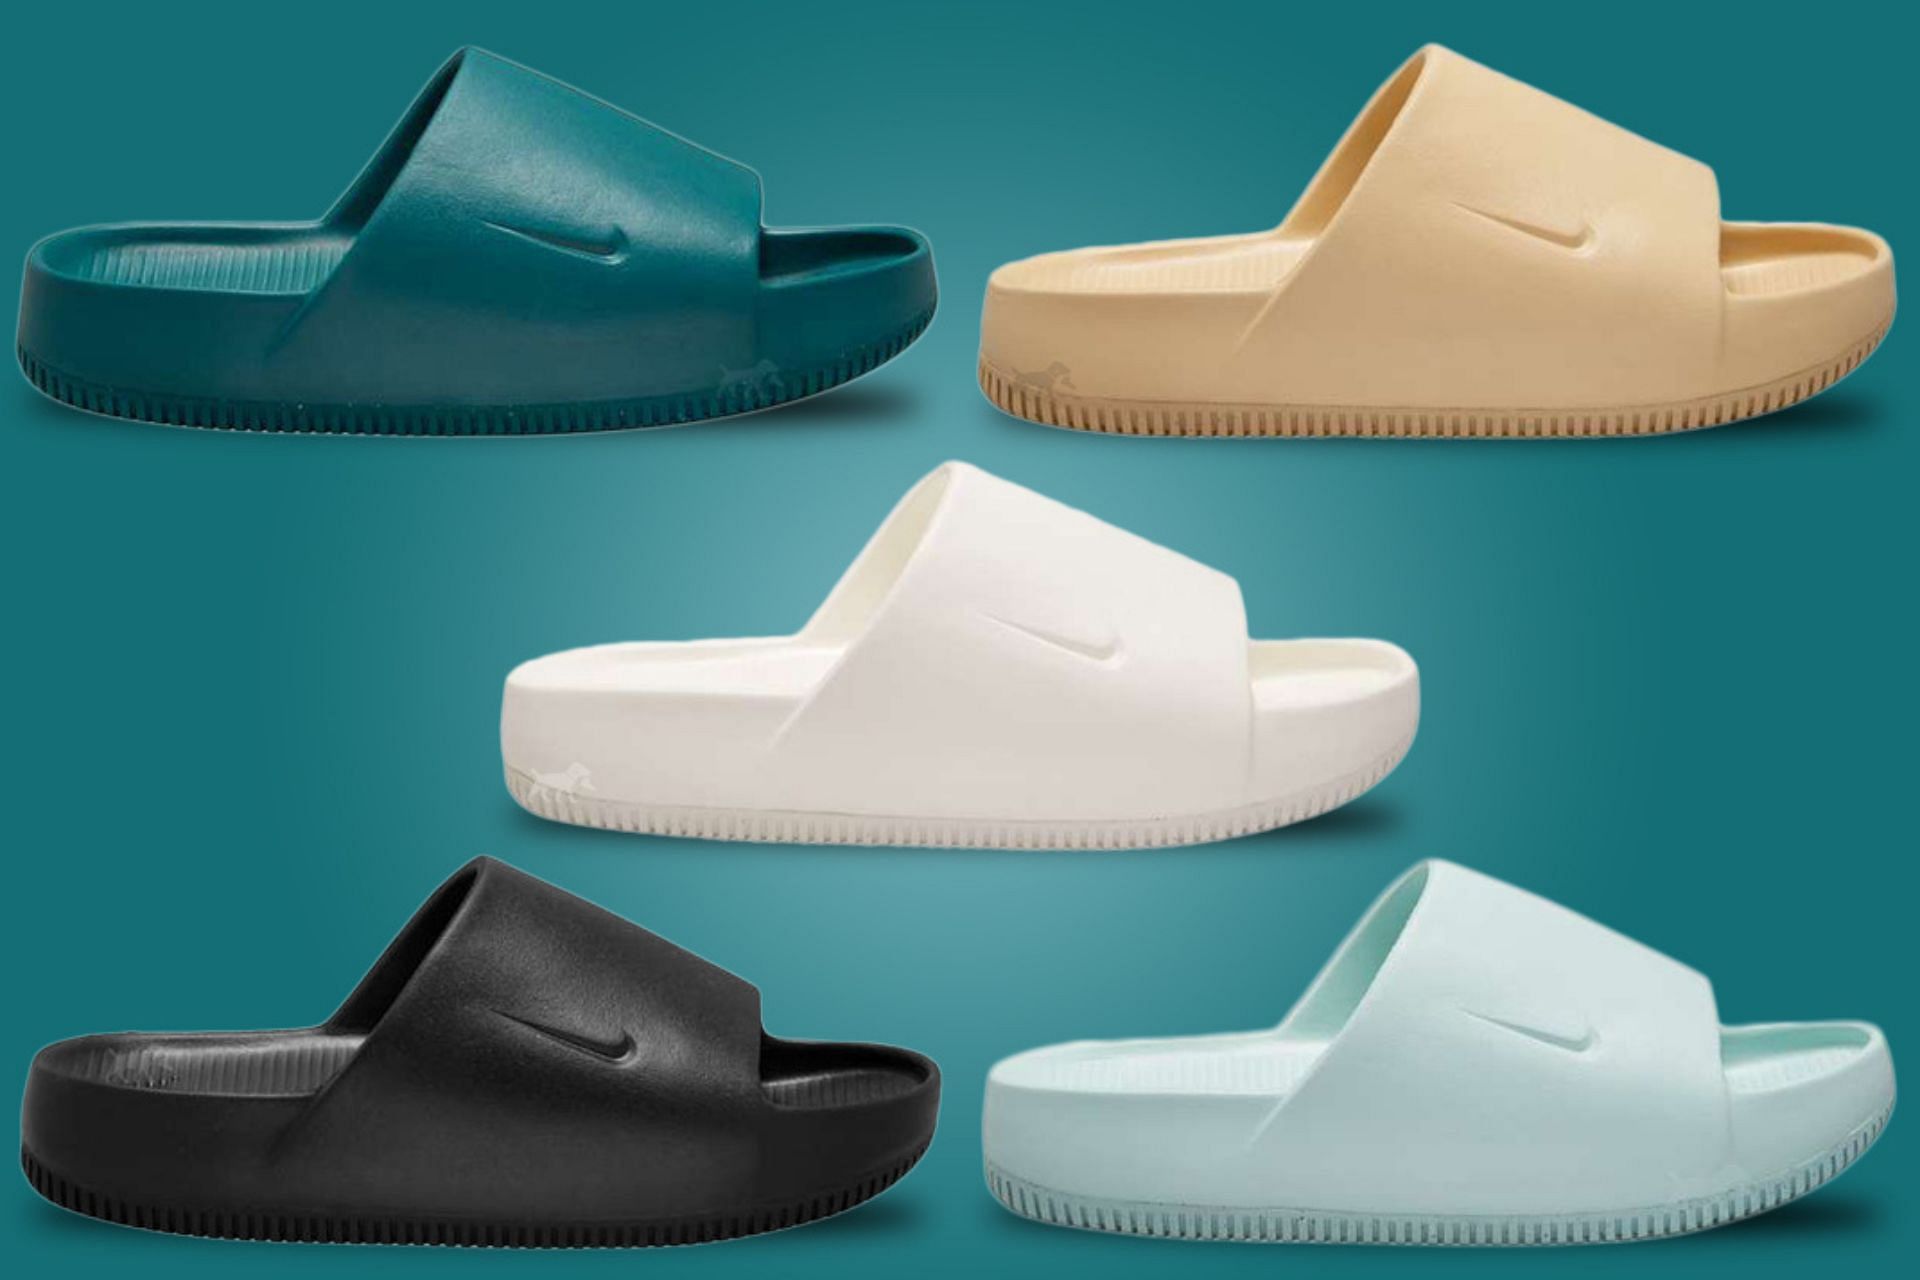 Nike Calm Slides offered in five color options (Image via Sole Retriever)